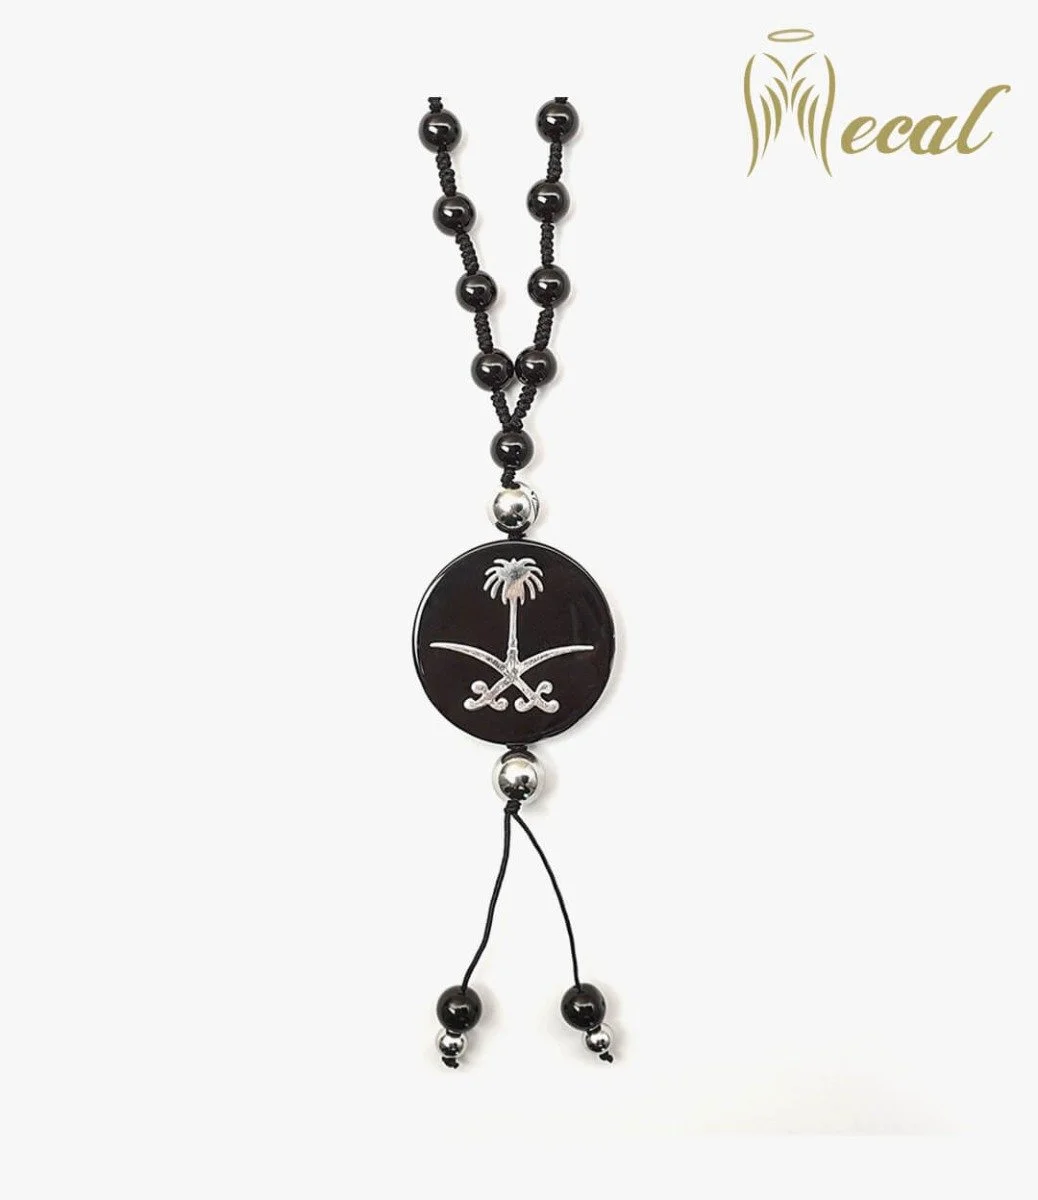 Knotted Beads Necklace by Mecal